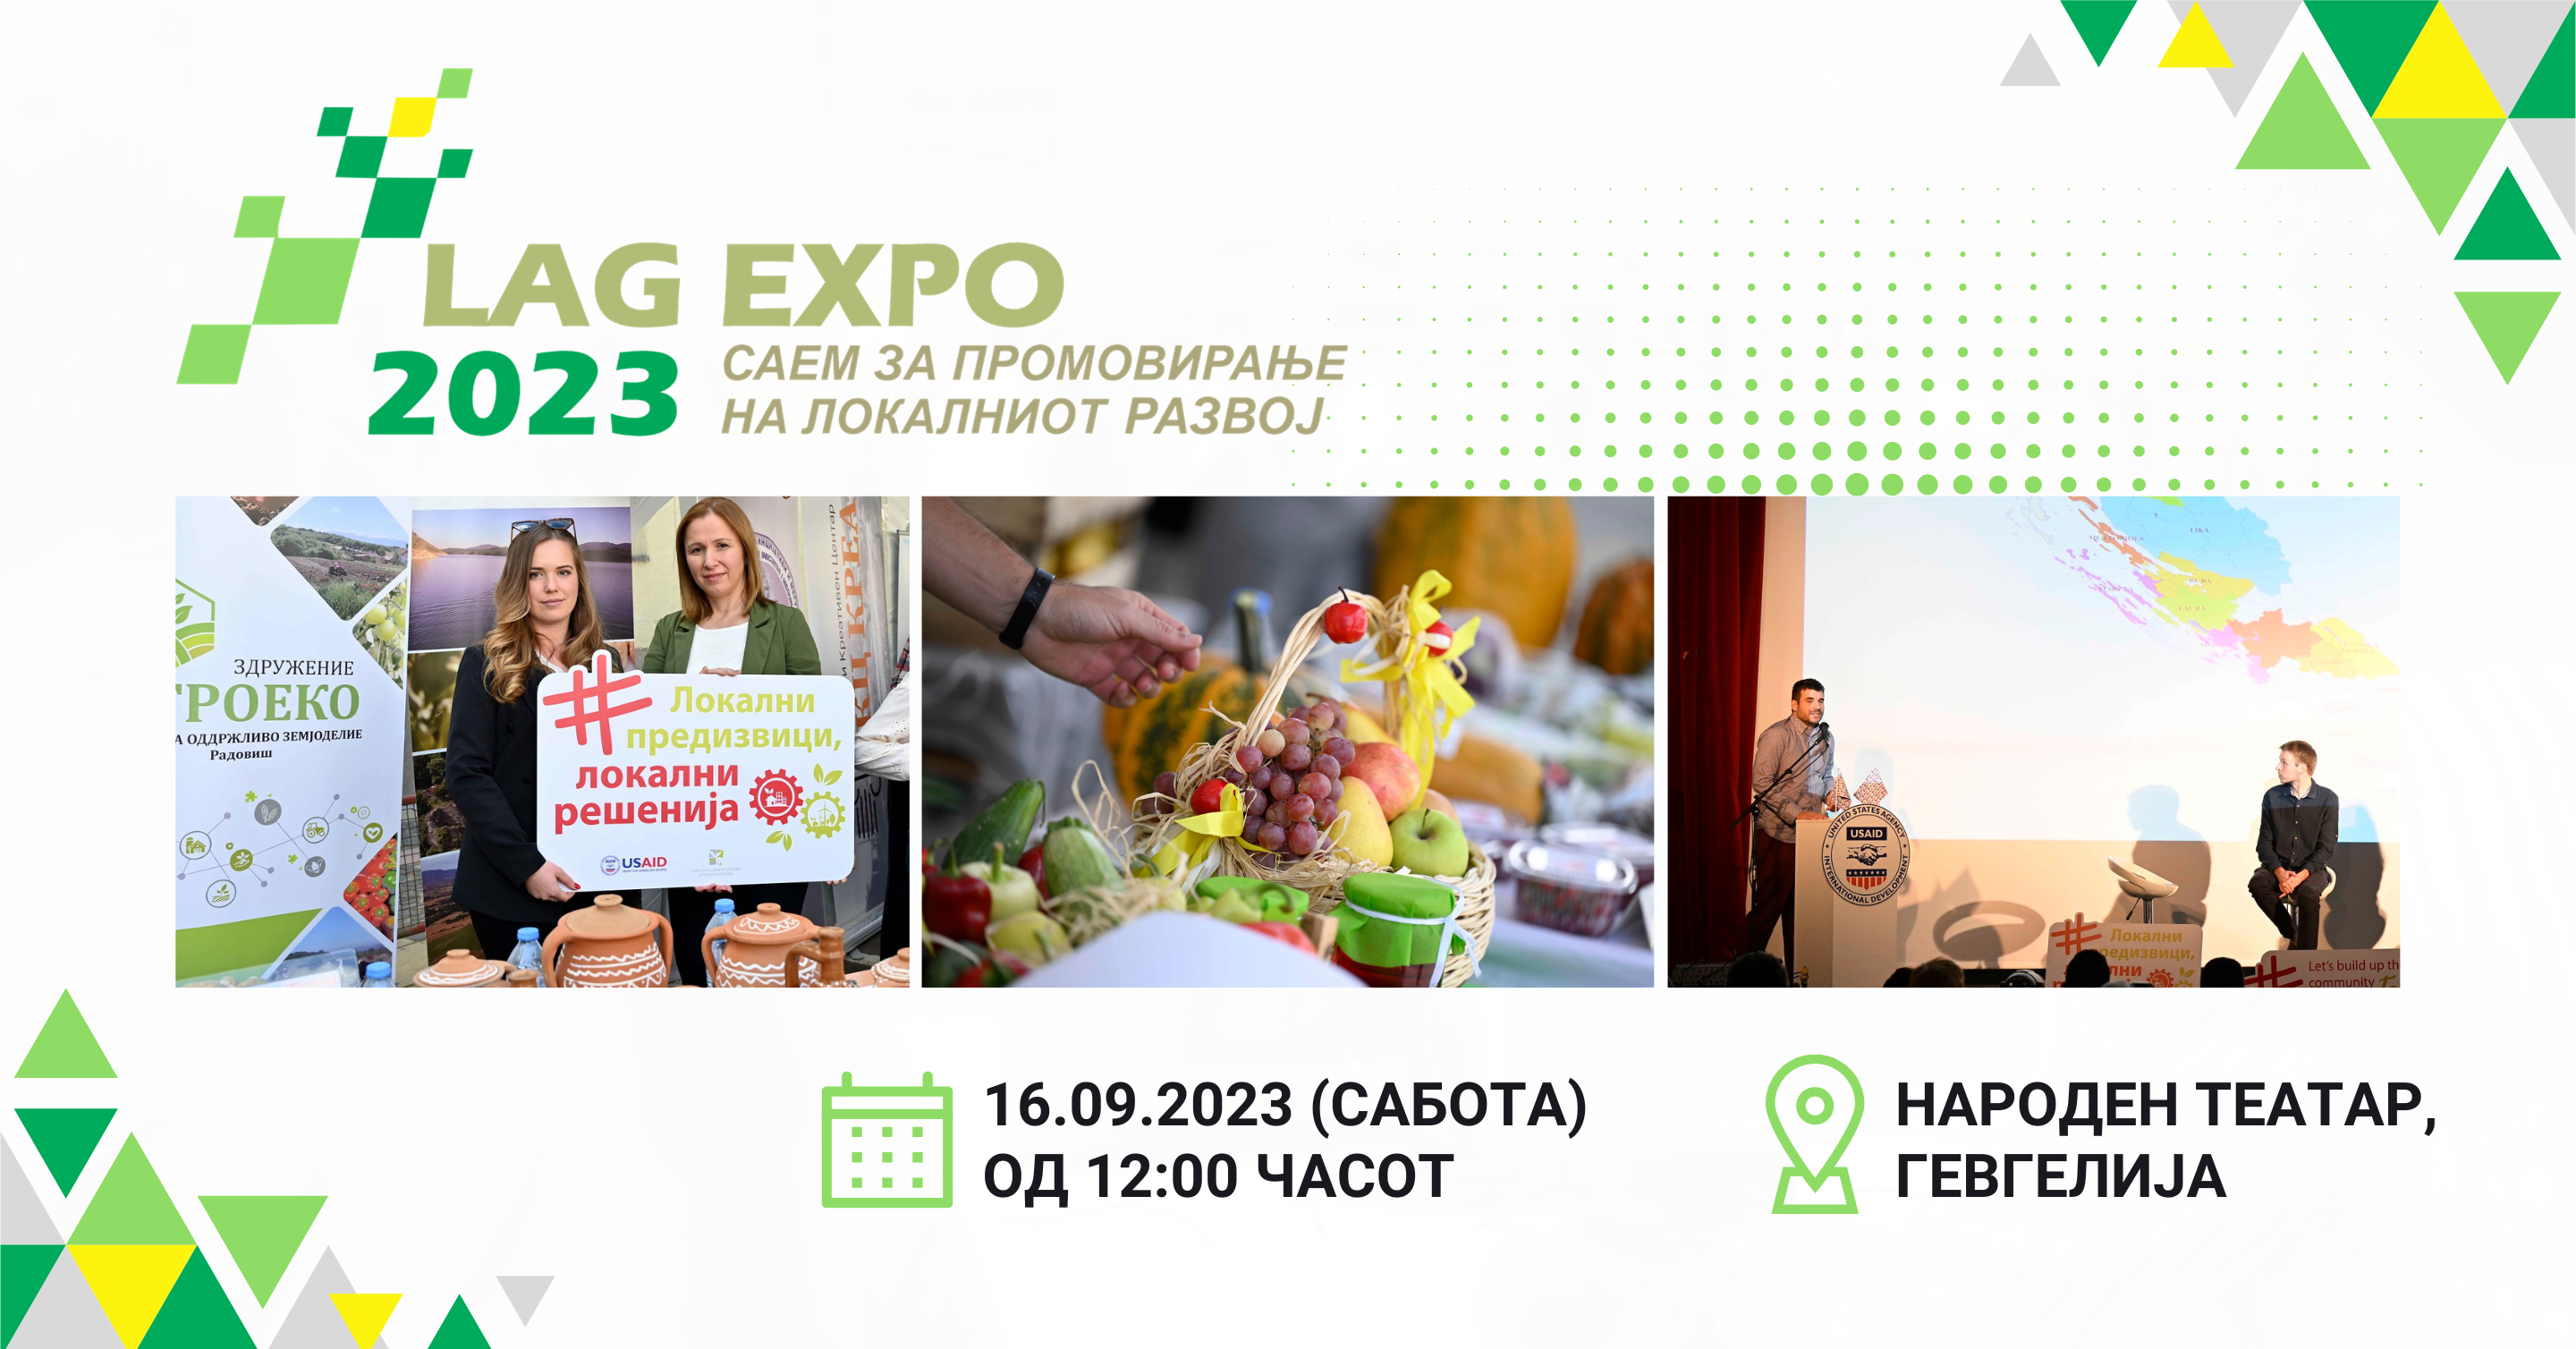 A new LAG Expo 2023 will be held in Gevgelija